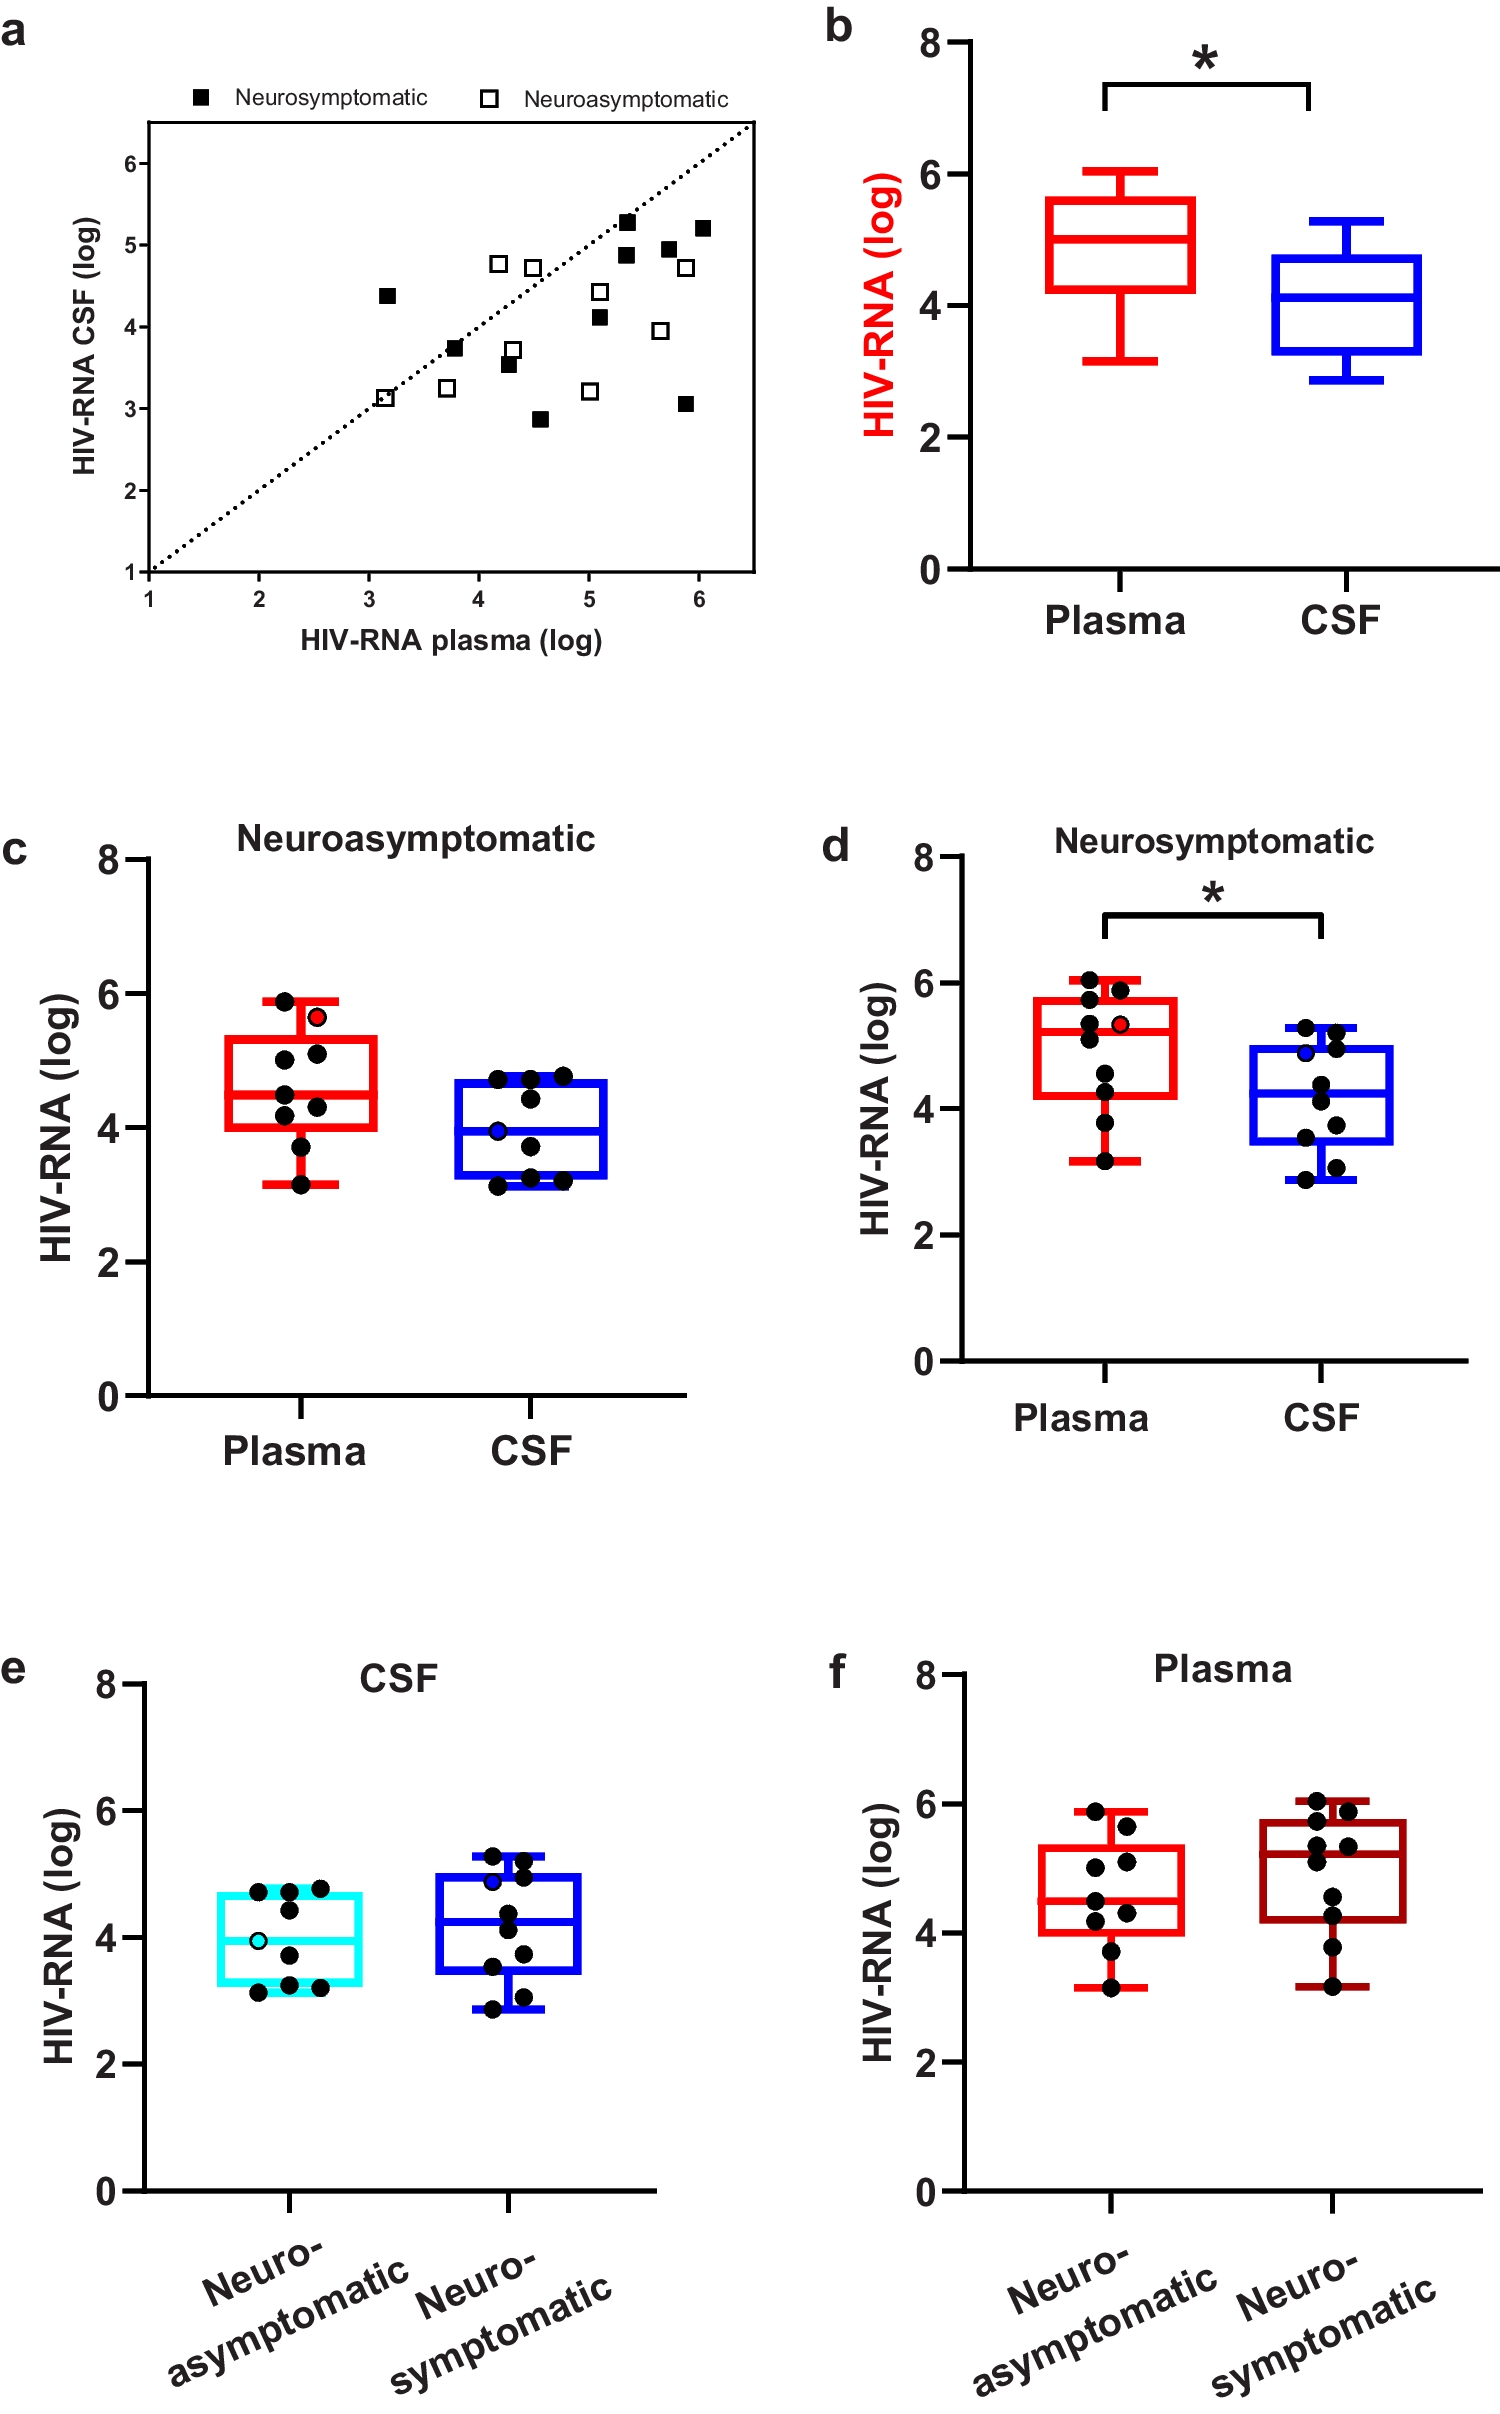 Characterization of HIV variants from paired Cerebrospinal fluid and Plasma samples in primary microglia and CD4+ T-cells